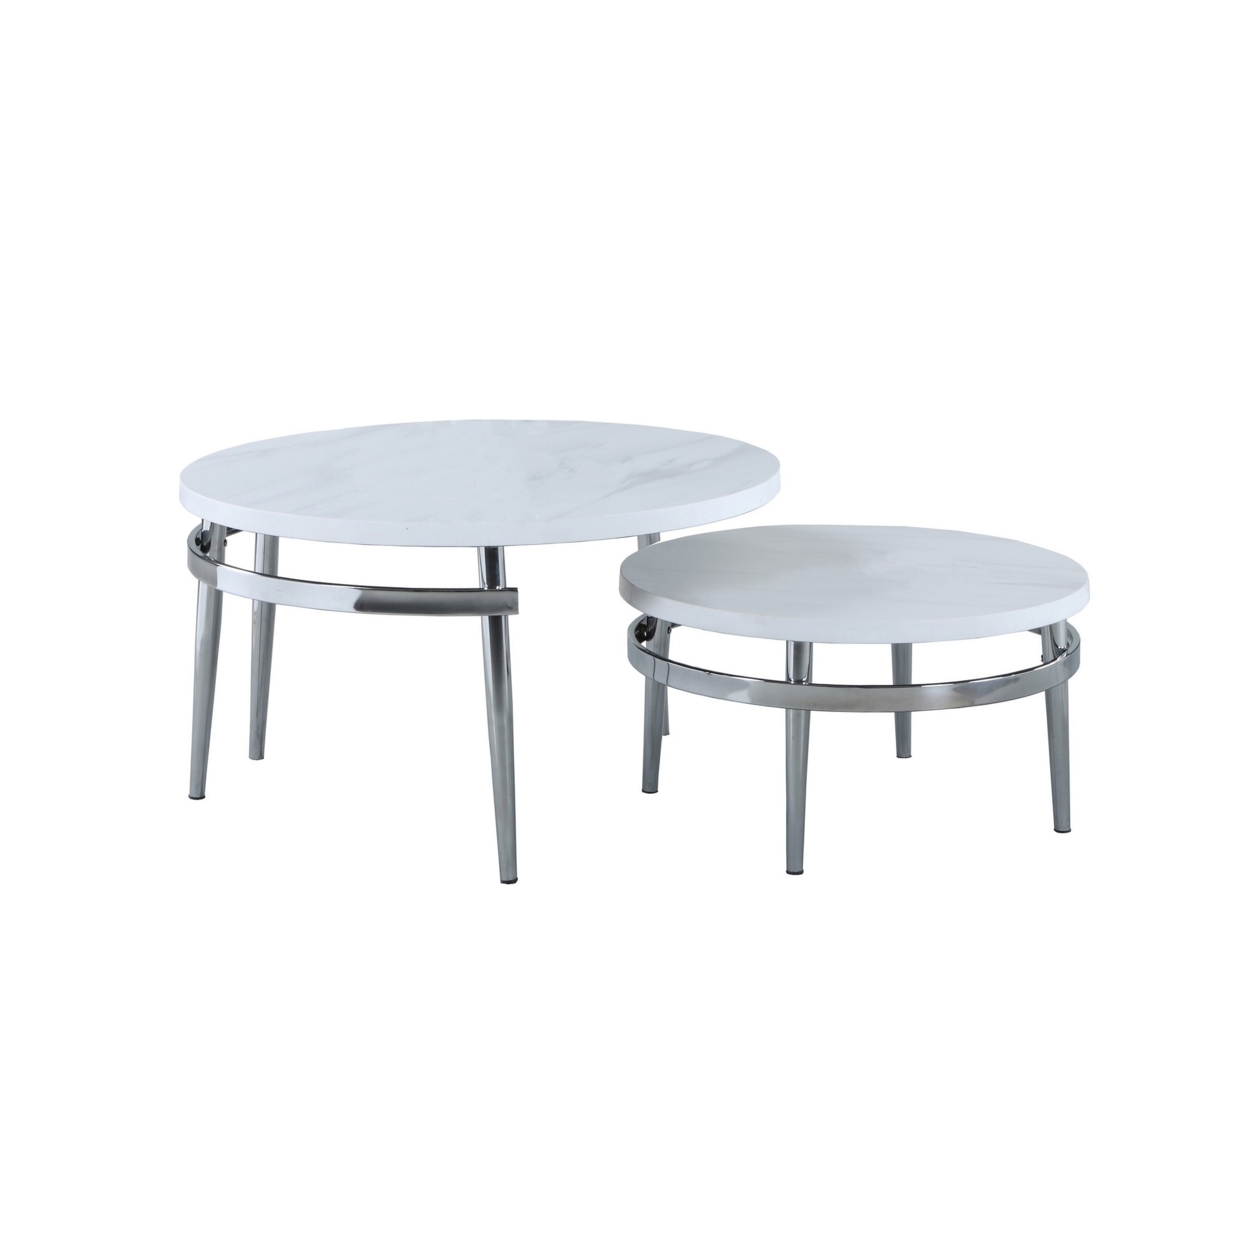 2 Piece Nesting Table With Round Faux Marble Top, White- Saltoro Sherpi